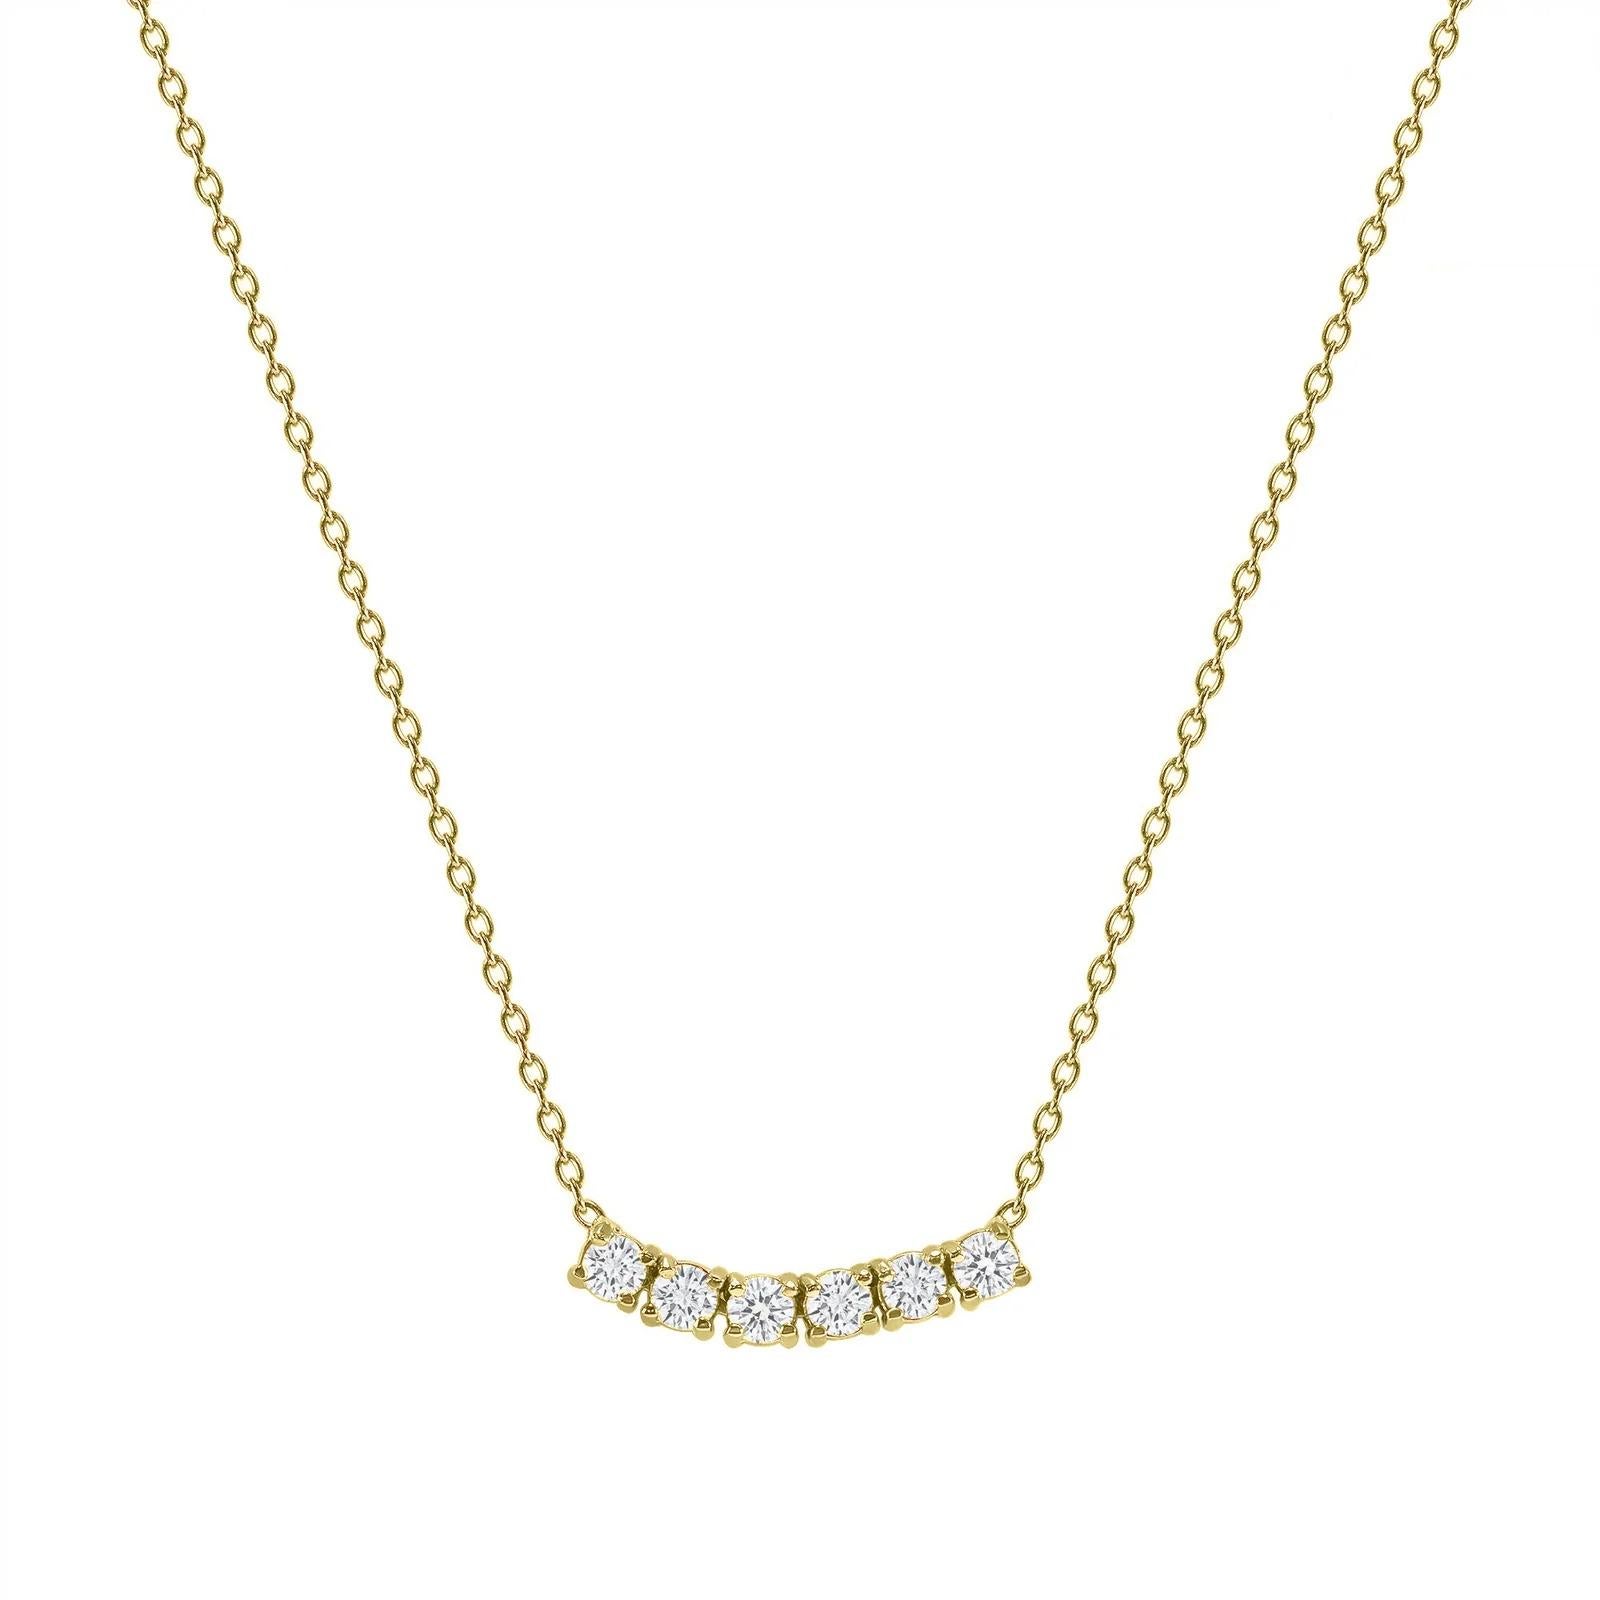 This petite, curved diamond necklace is crafted with gorgeous 14k gold set with six round diamonds.  

Gold: 14k 
Diamond Total Carats: 1 ct
Diamond Cut: Round (6 diamonds)
Diamond Clarity: VS
Diamond Color: F
Color: Yellow Gold
Necklace Length: 20